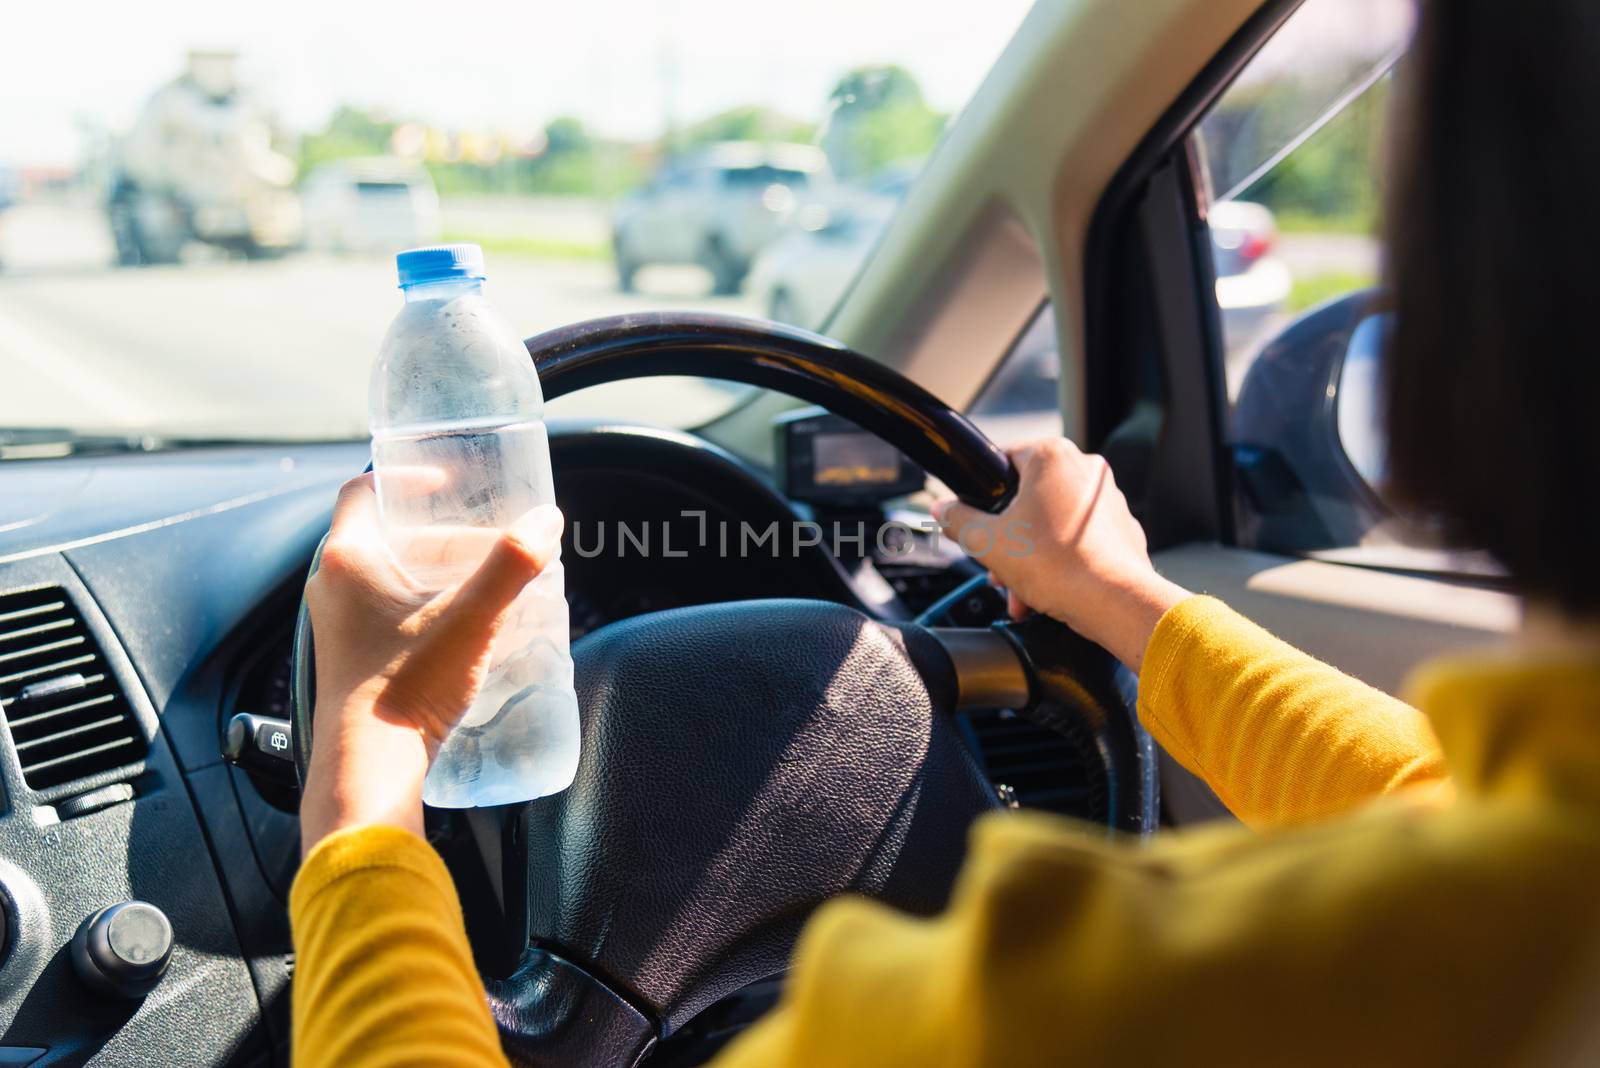 Asian woman holding a water bottle for drink while driving the car in the morning during going to work on highway road, Transportation and vehicle concept